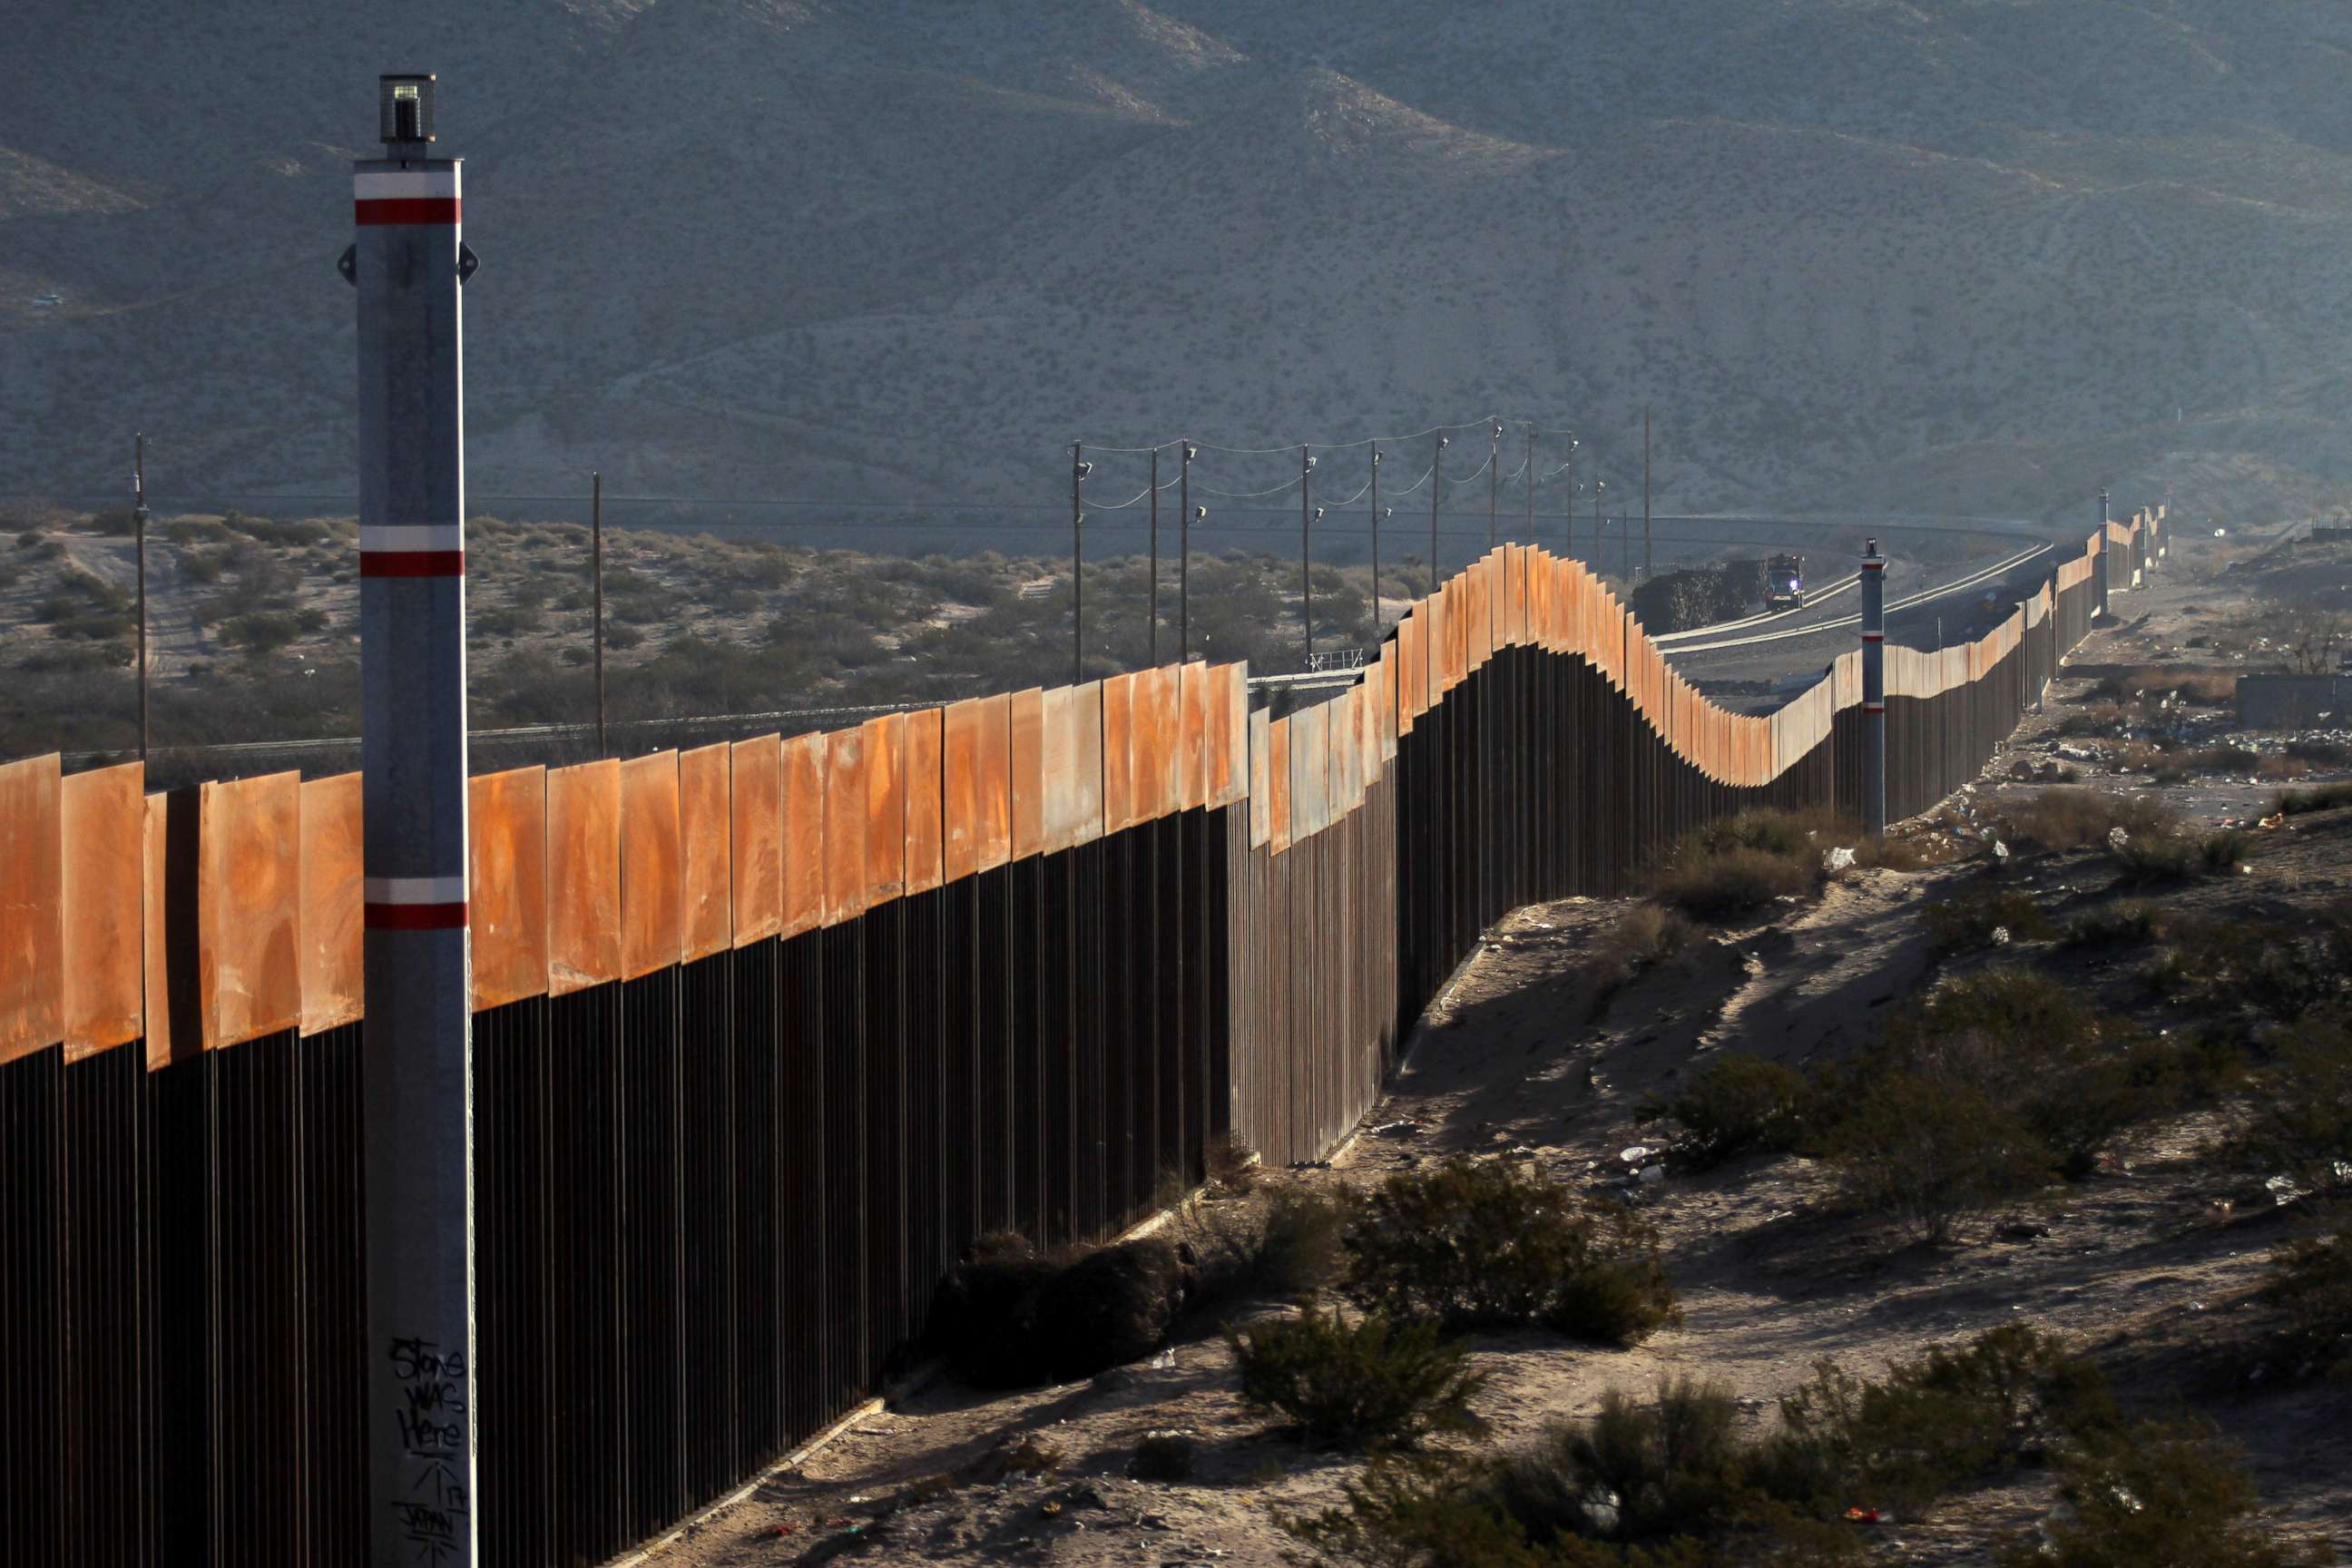 PHOTO: A view of the border wall between Mexico and the United States, in Ciudad Juarez, Chihuahua State, Mexico on Jan. 19, 2018.